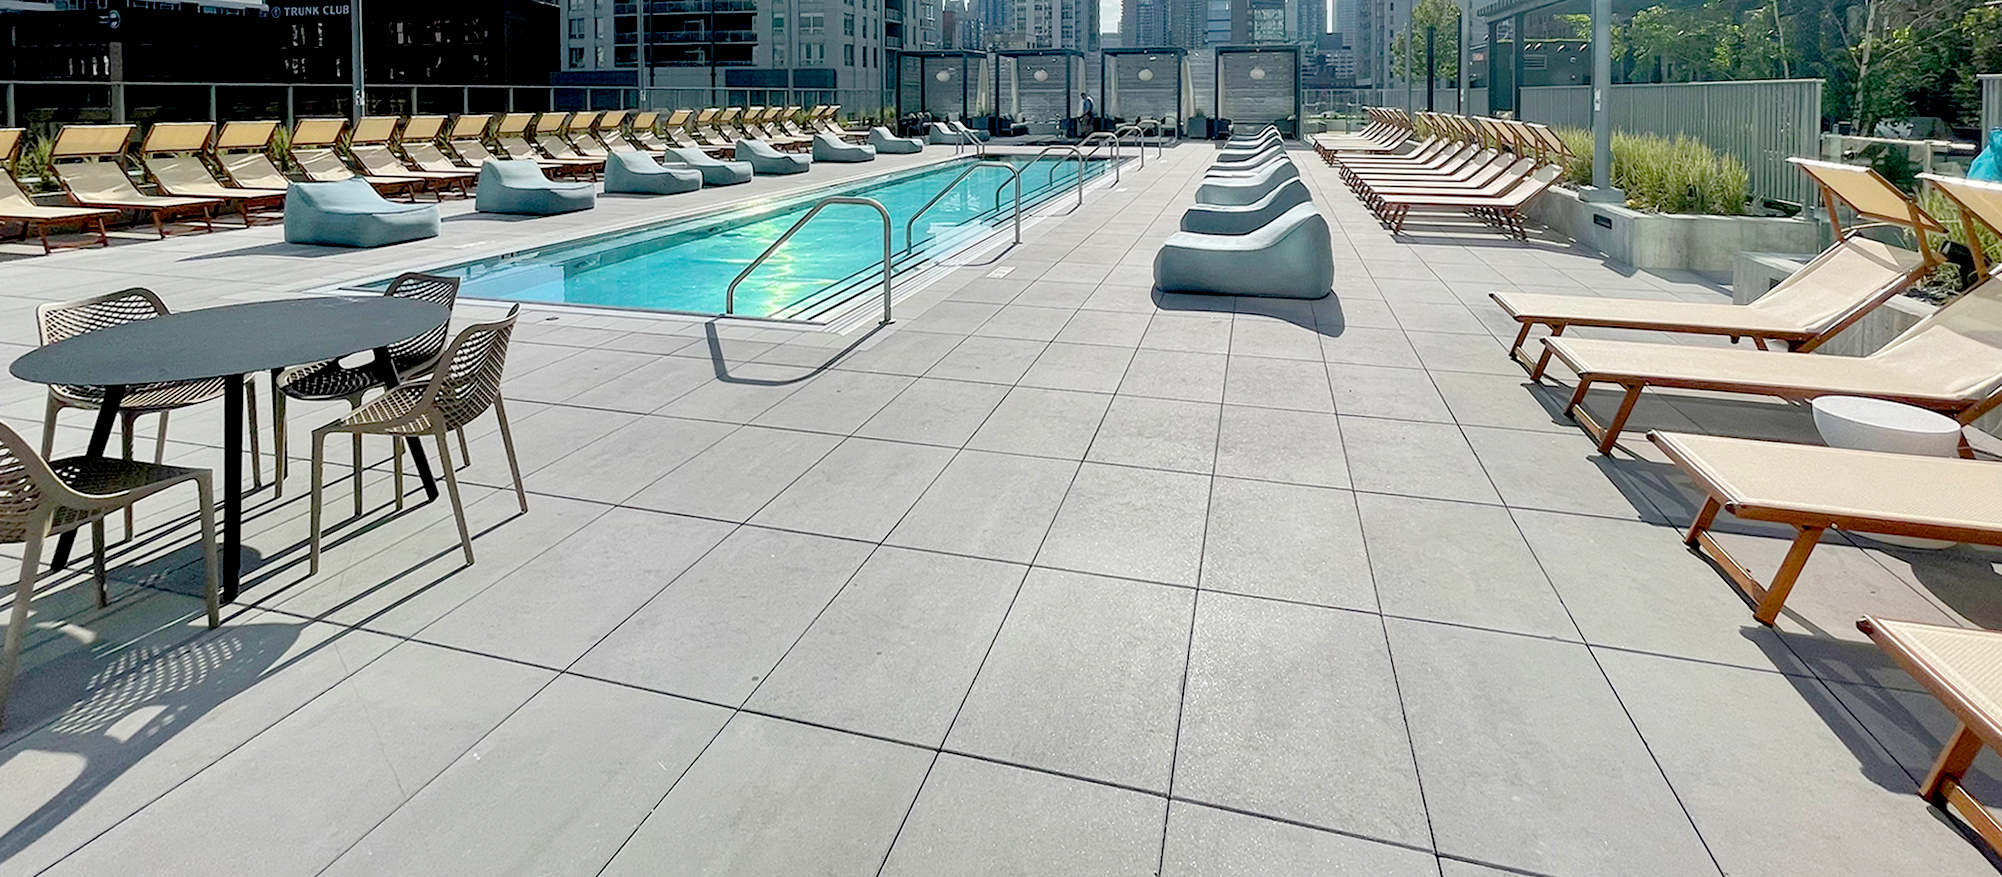 A view of the 369 W Grand pool deck featuring the Chicago skyline and paved with Unilock Beacon Hill Smooth XL in the color opal.